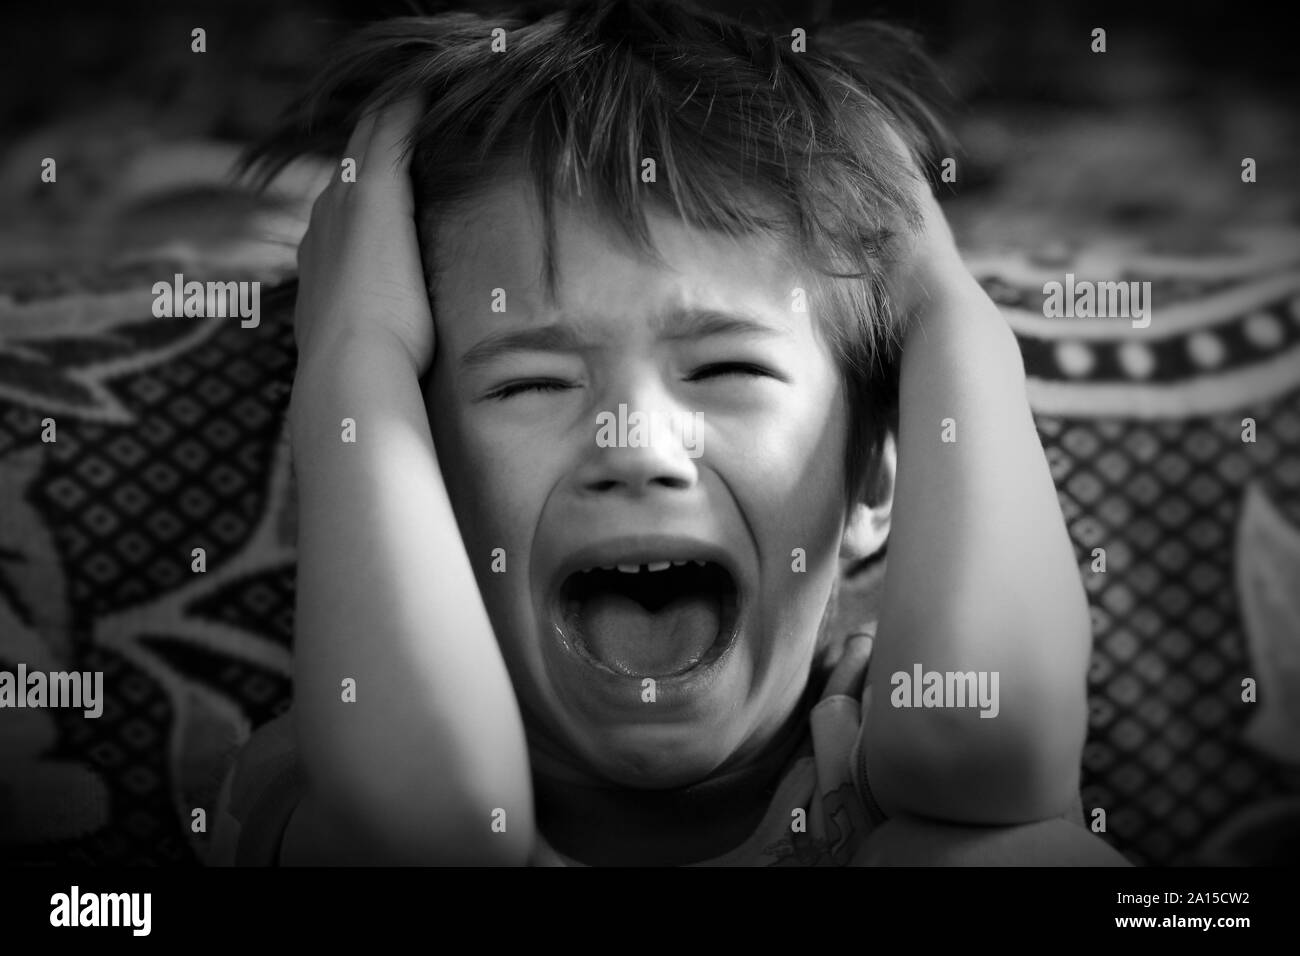 Black and white portrait of a boy crying out loud Stock Photo